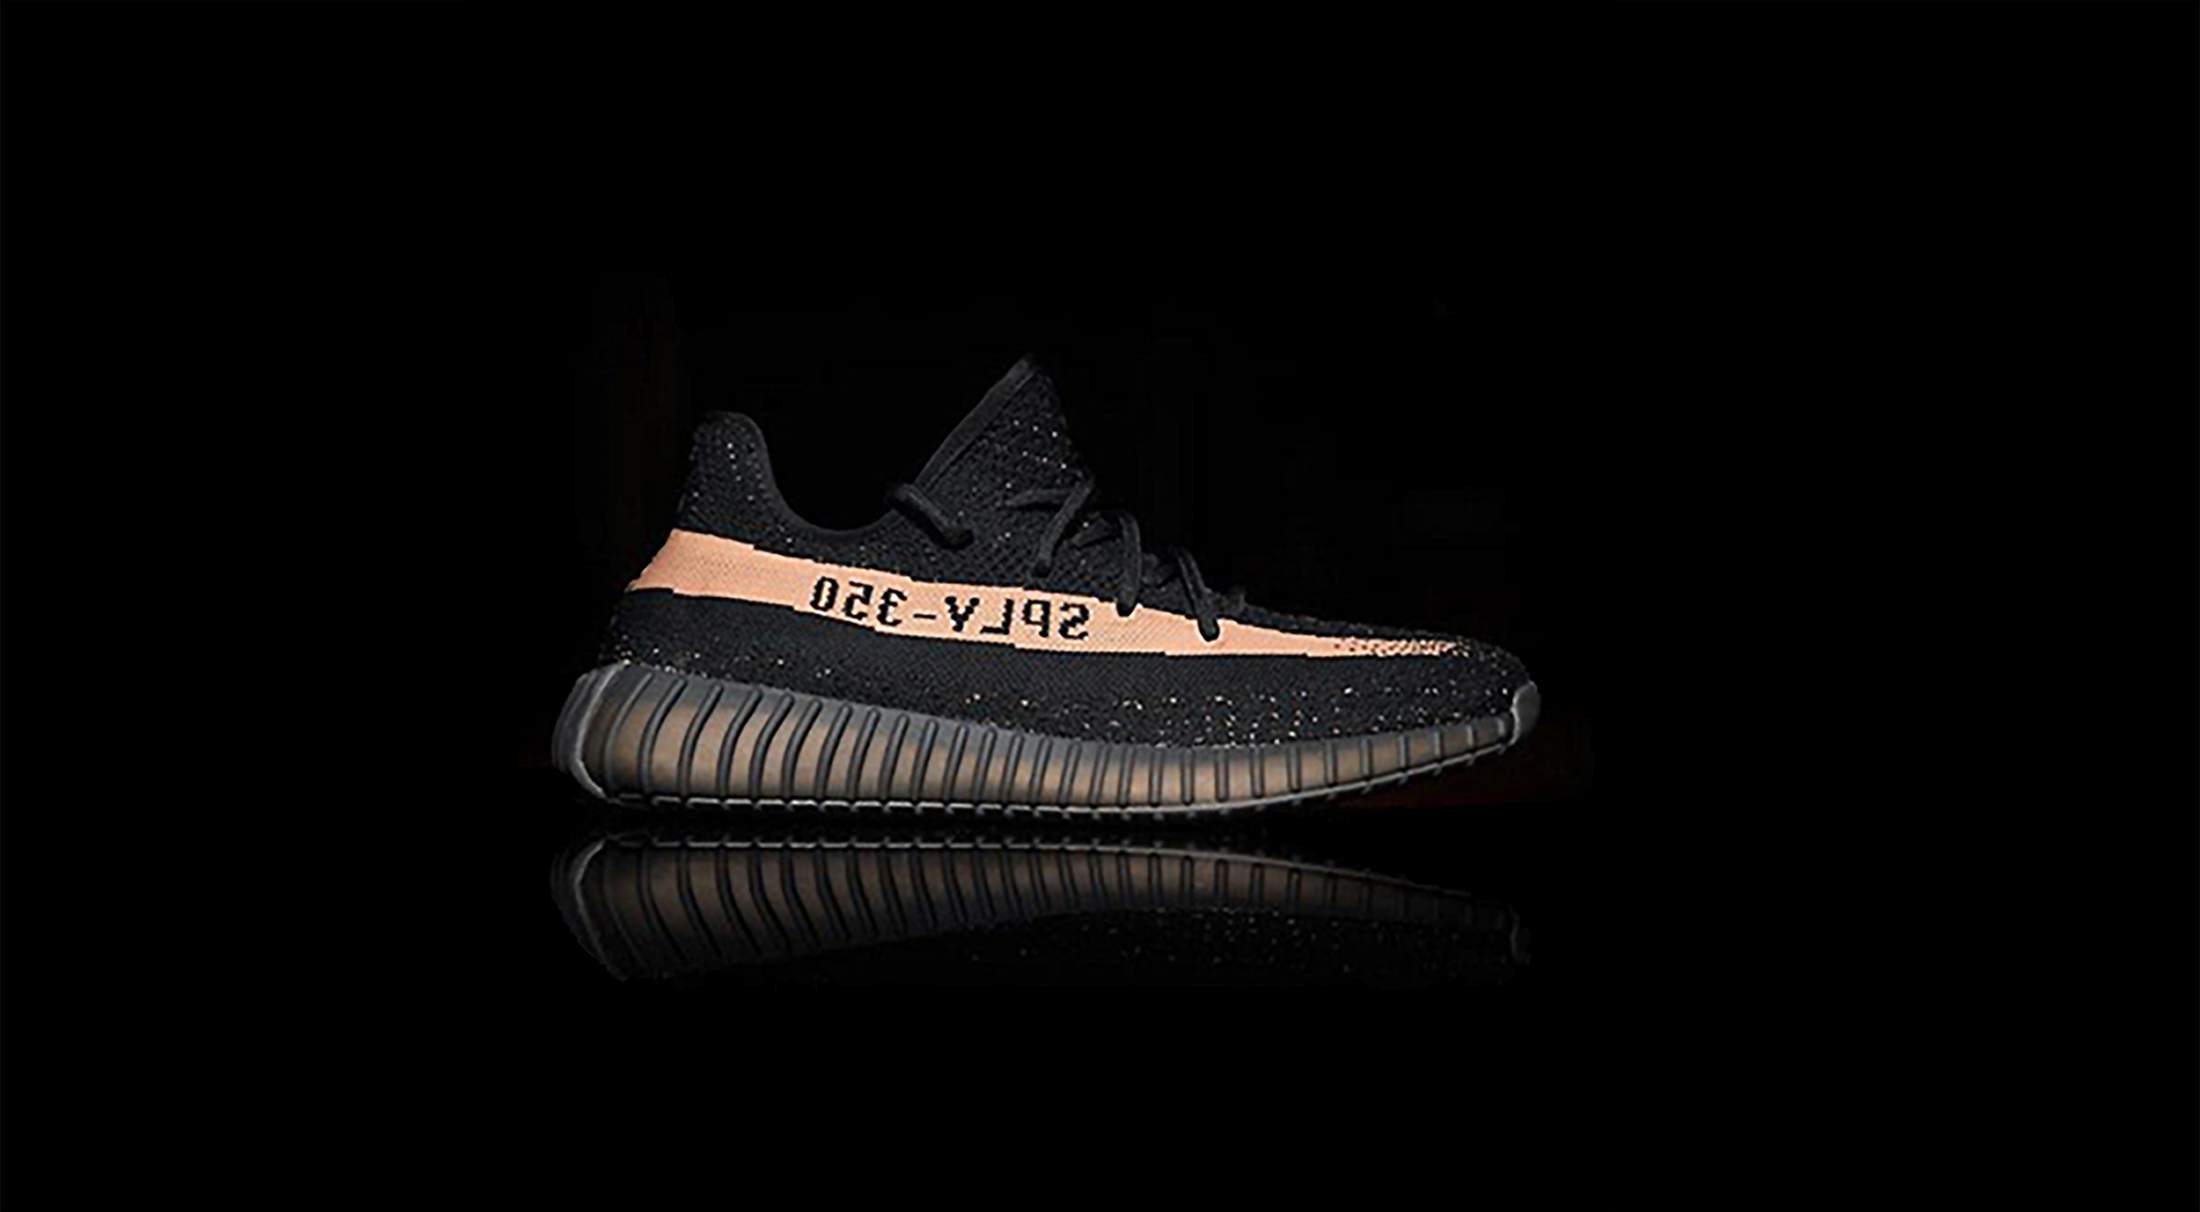 The Adidas Yeezy Boost 350 V2 “Black/Peach” Is Coming Soon